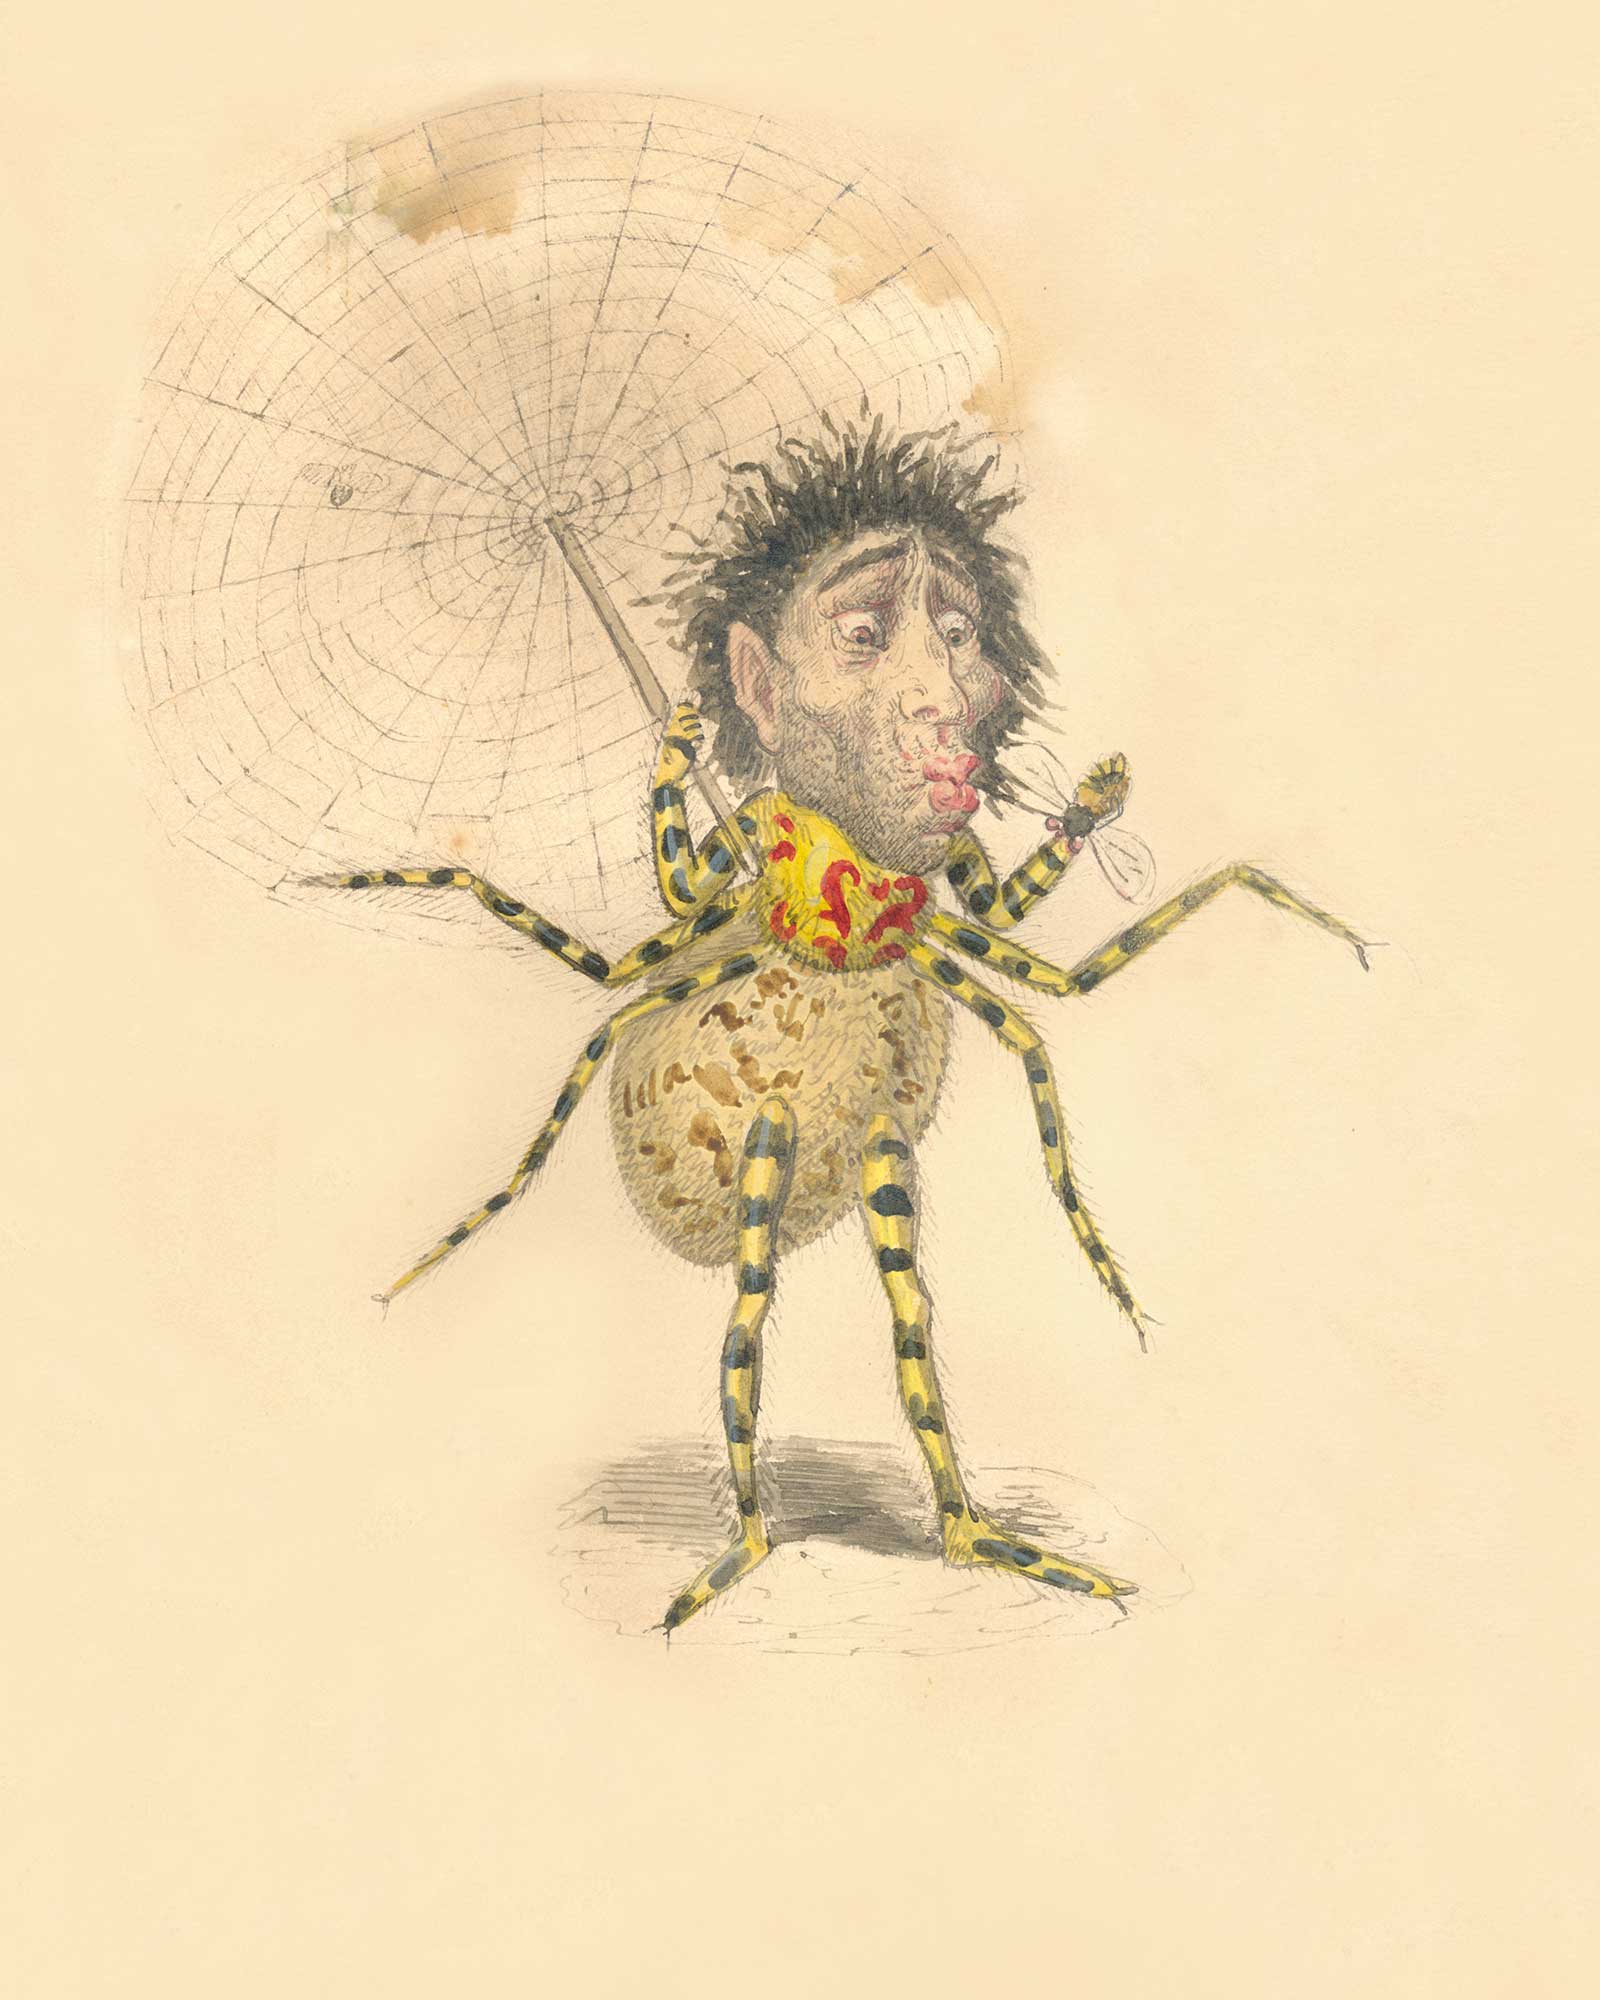 Charles Briton’s illustrated design of a spider costume, created for the Mistick Krewe of Comus for the eighteen seventy-three Mardi Gras parade in New Orleans. Organized in eighteen fifty-six, Comus was the first of the krewes, or secret societies, that marched in the annual parades held in the city during the days leading up to the beginning of Lenten abstinence. Briton’s costumes were created to illustrate the theme of the organization’s procession that year: “The Missing Links to Darwin’s Origin of Species.” Featuring fantastical representations of a wide range of fauna and flora, Briton’s designs for the conservative and predominantly Anglo-American Comus krewe were intended to mock both the new theories of evolution and the Reconstruction-era politicians of the day.